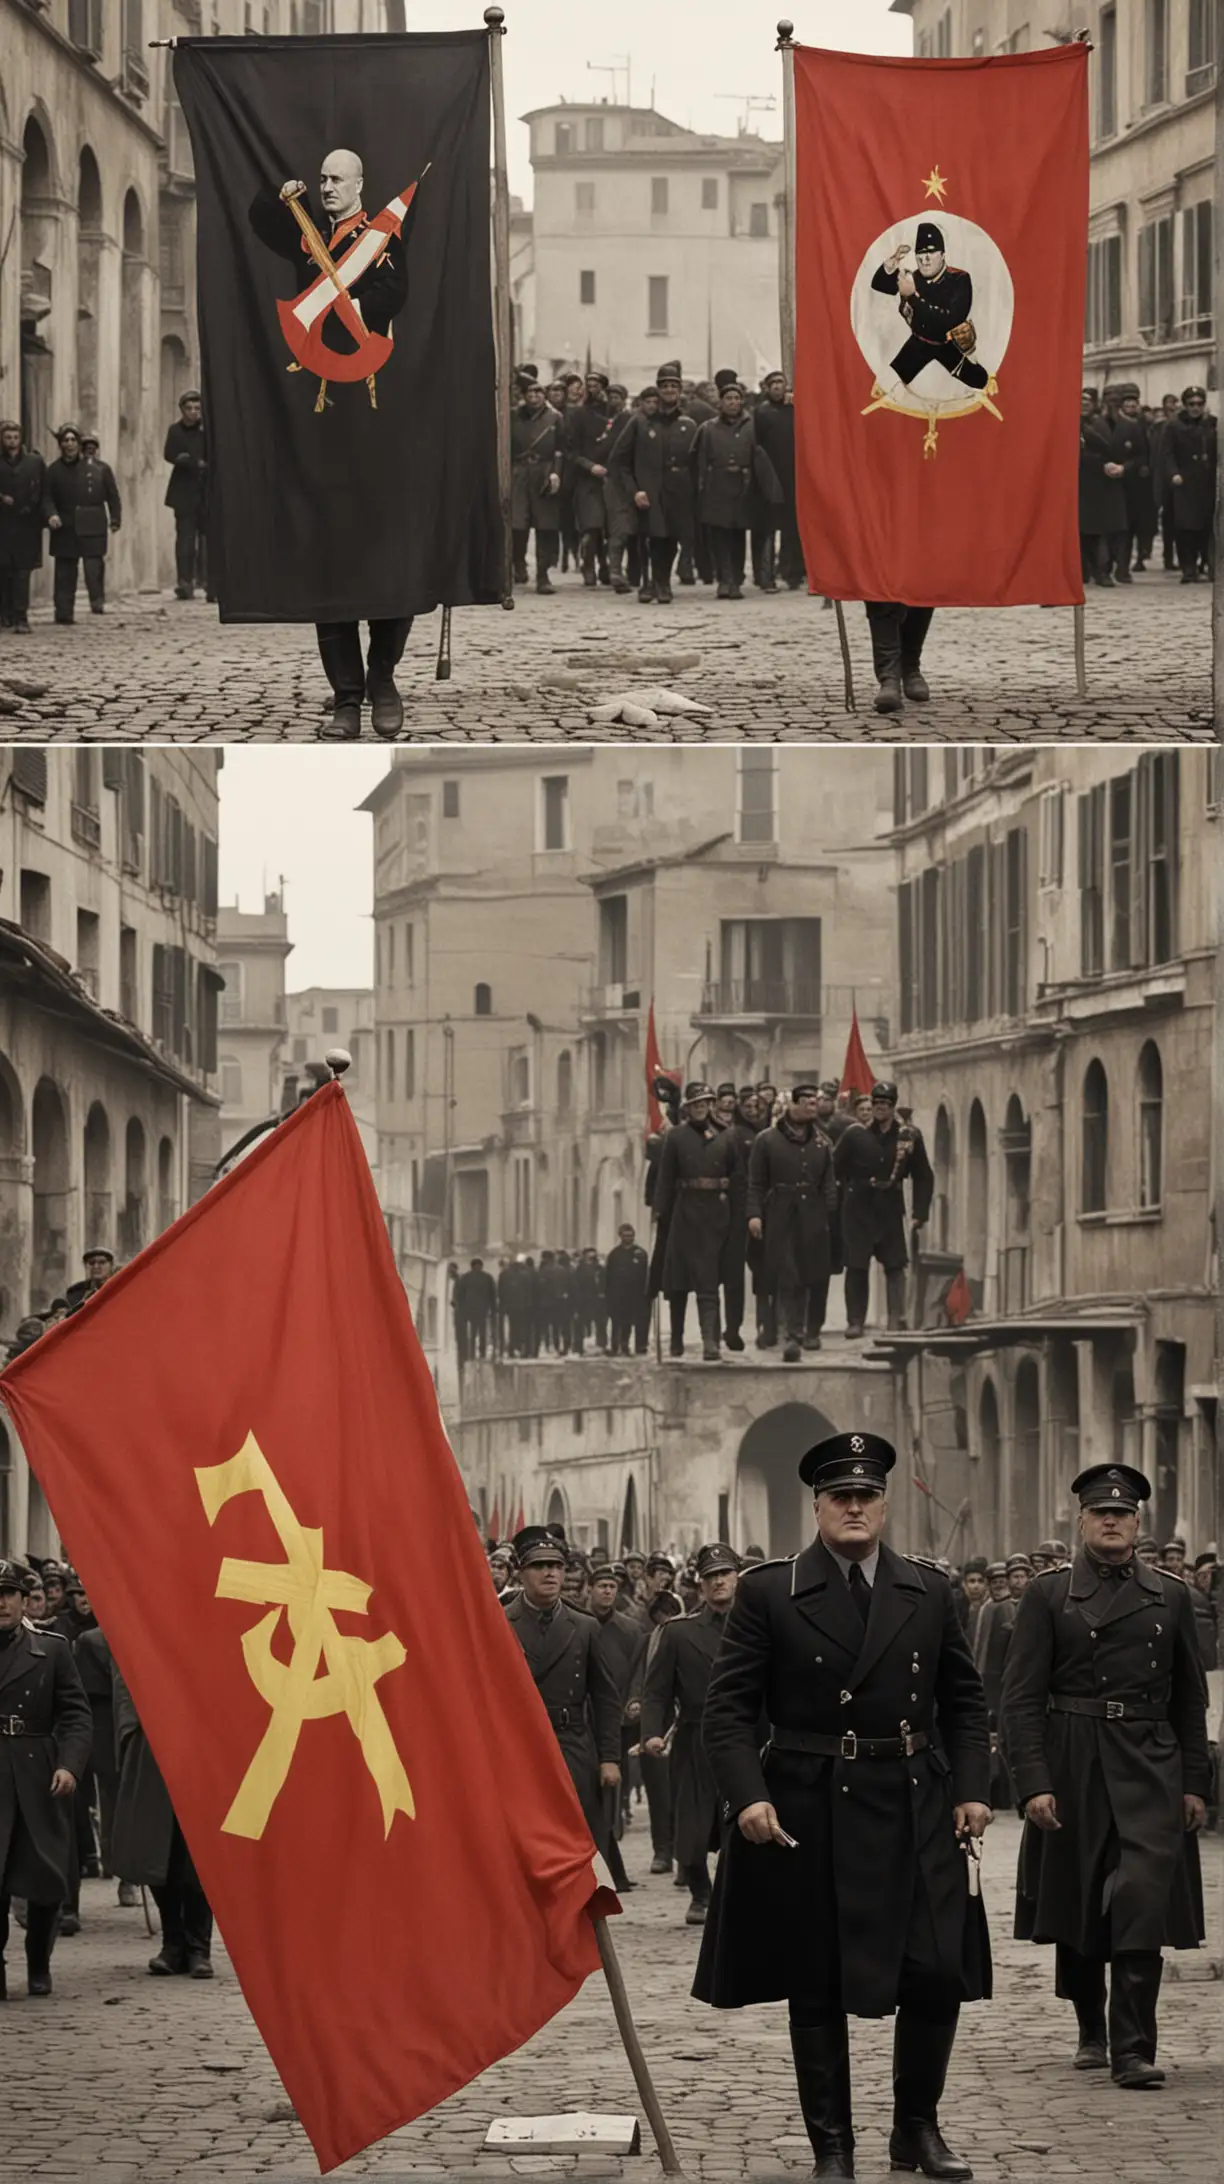 Scene: Show a split image of Mussolini holding a socialist flag and a fascist flag)
Background: Rome